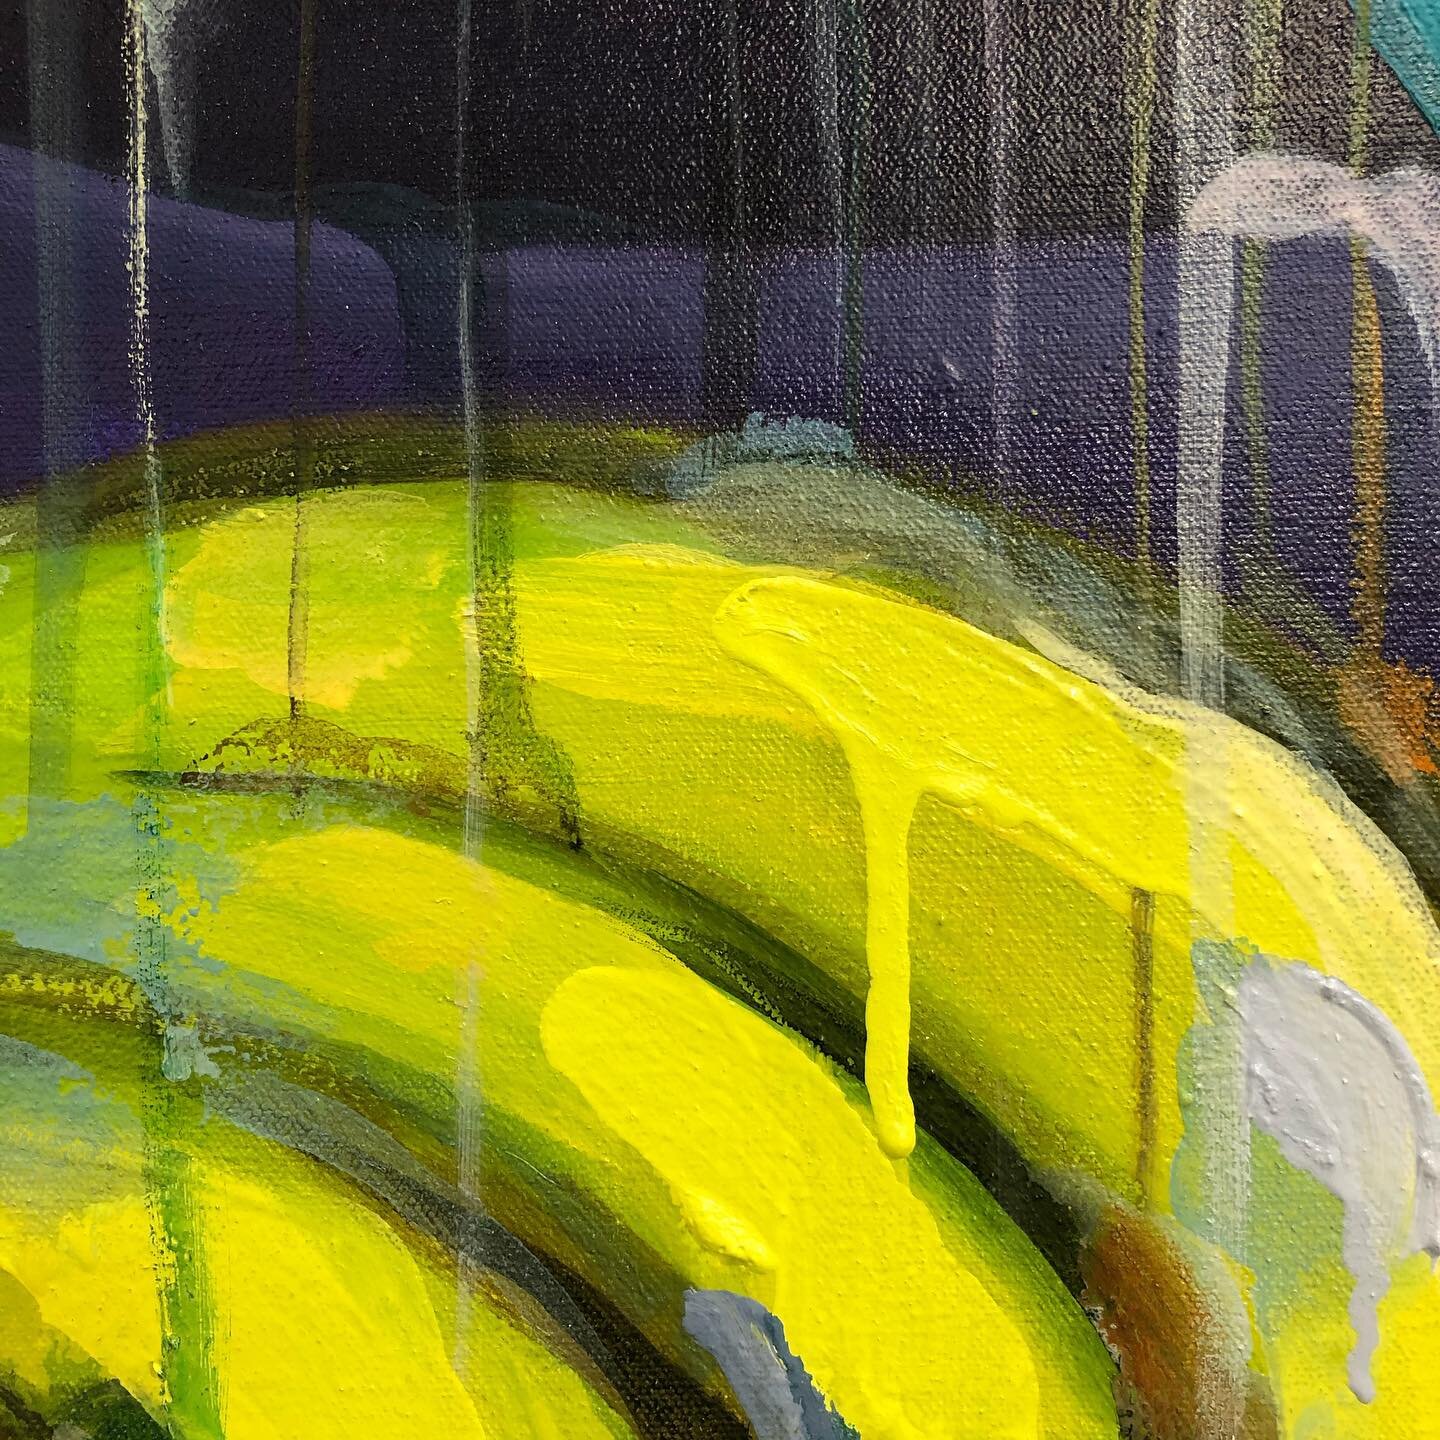 Missing the tactility of the world, details of new paintings 
.
.
.
.
#moniquemmf #chartreuse #ooze #goo #paint #details